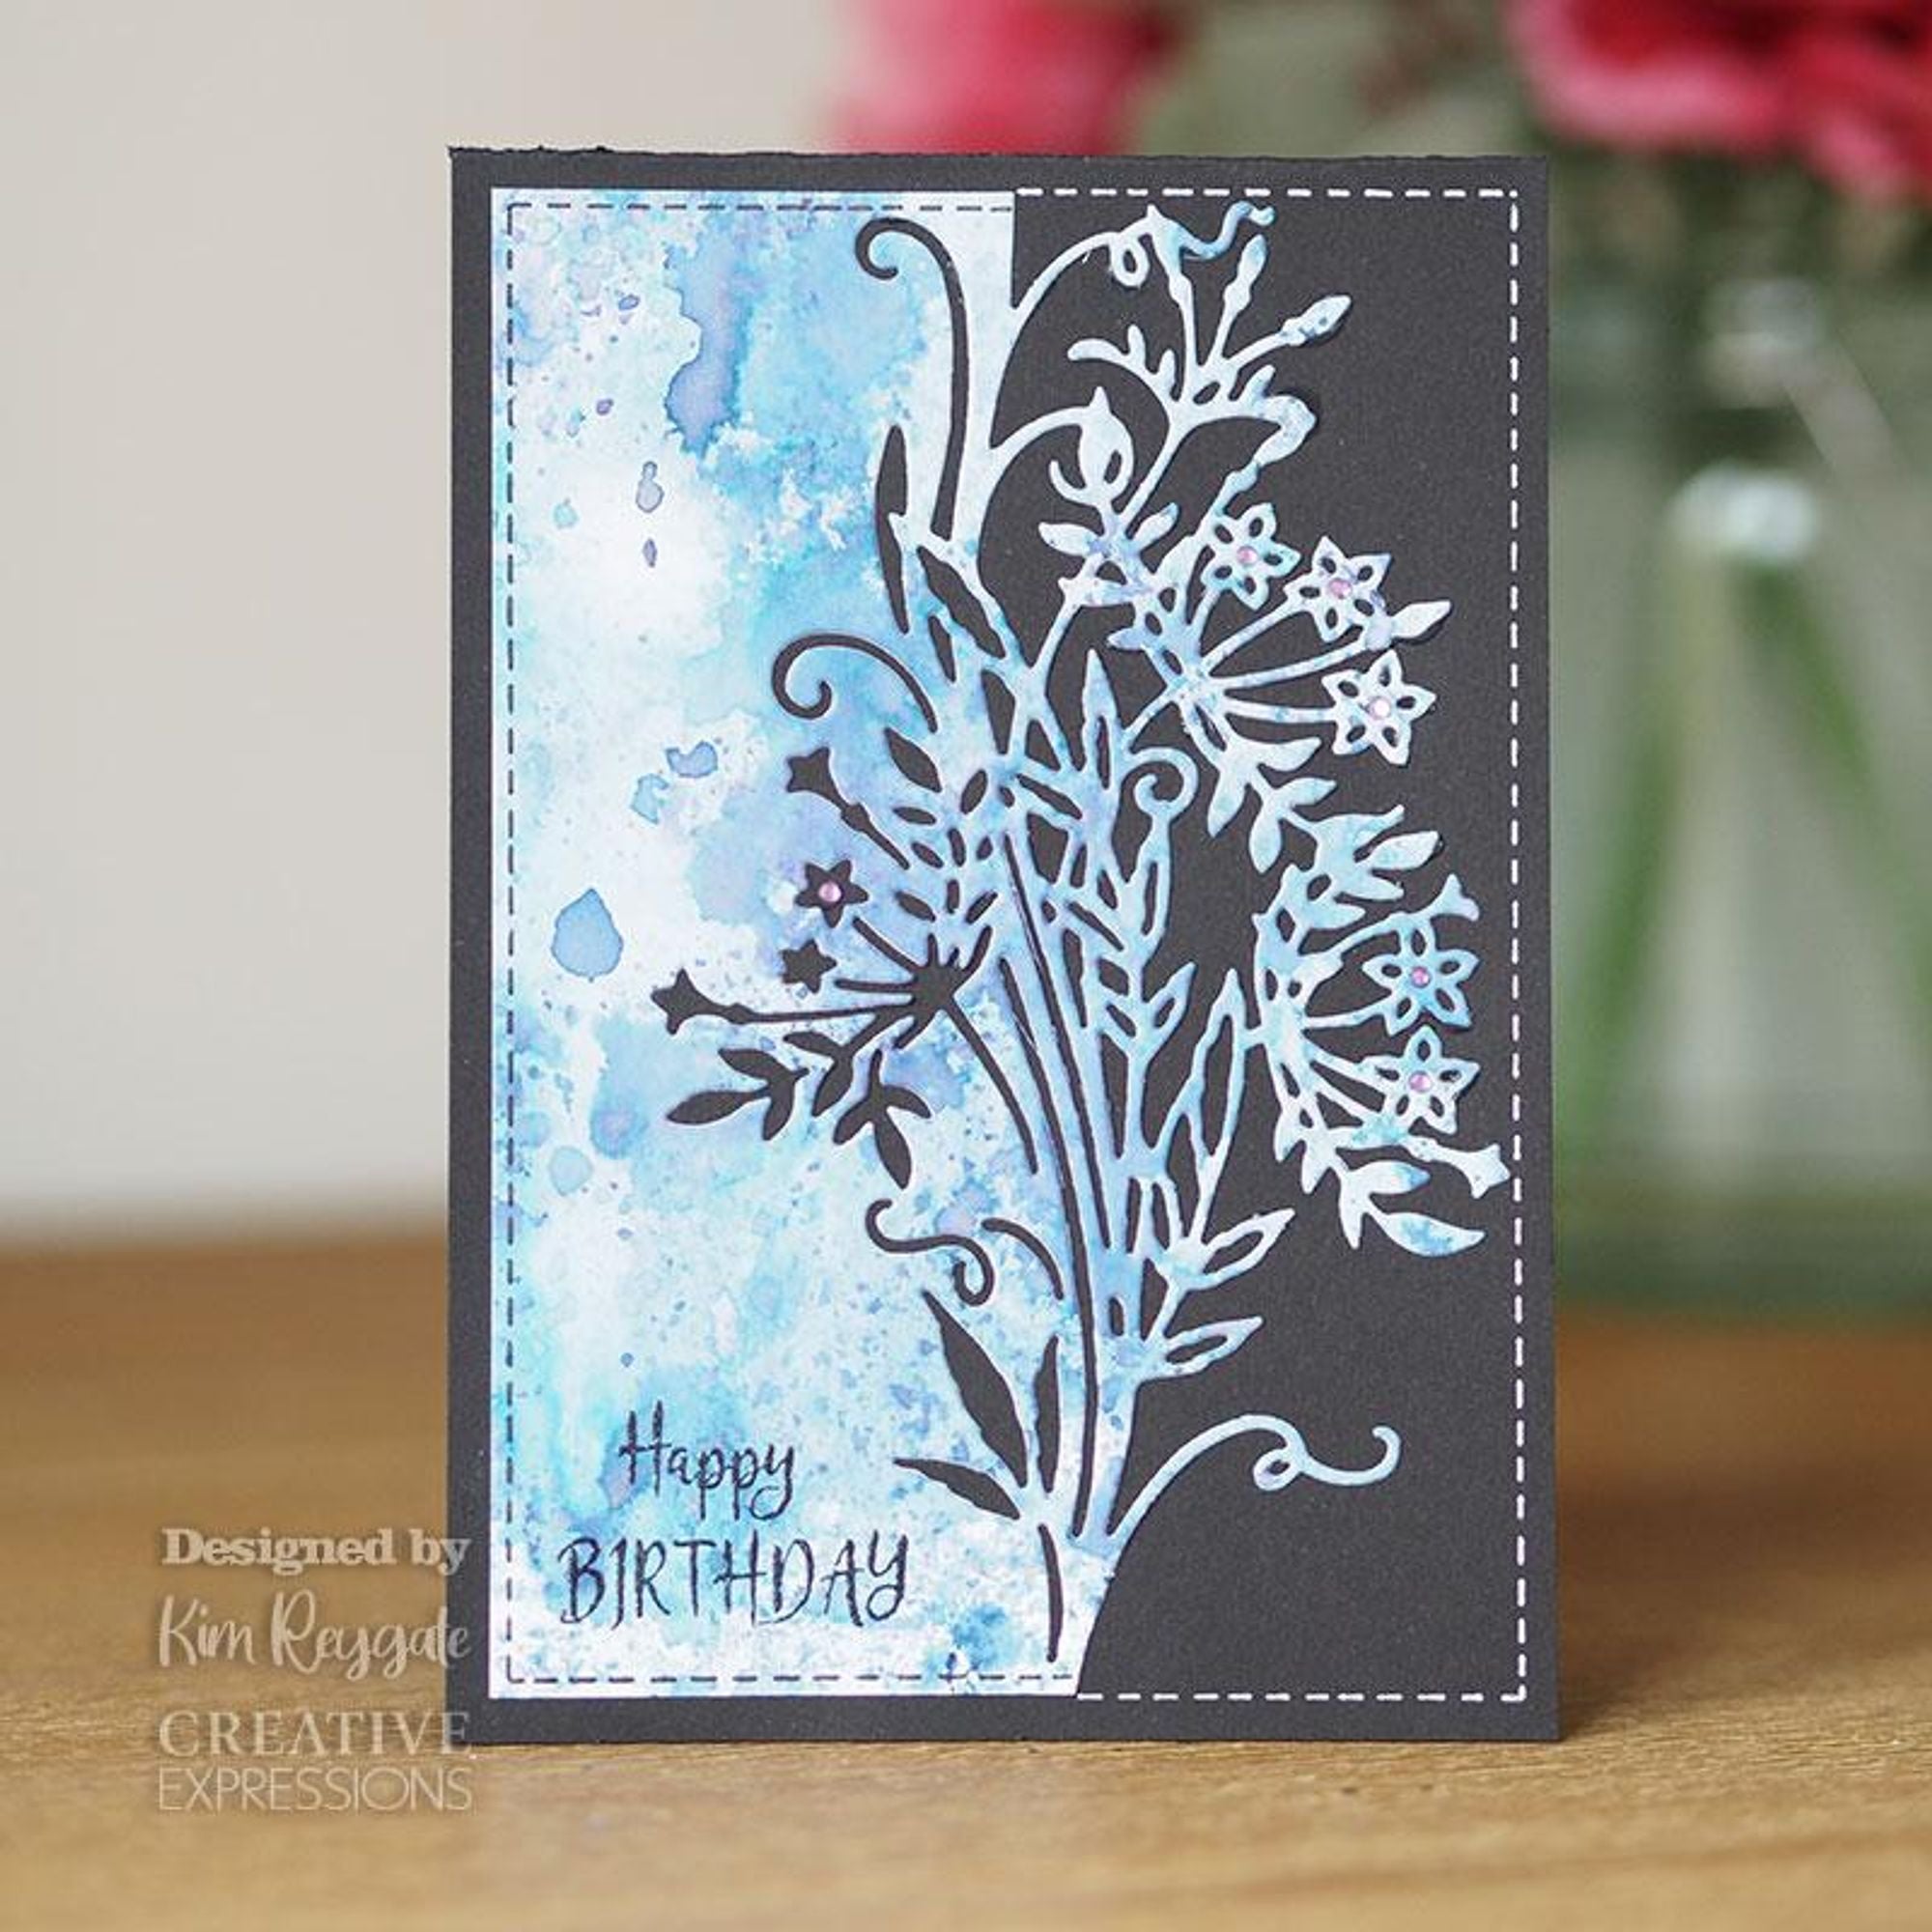 Creative Expressions Paper Cuts Corner Forget Me Not Craft Die